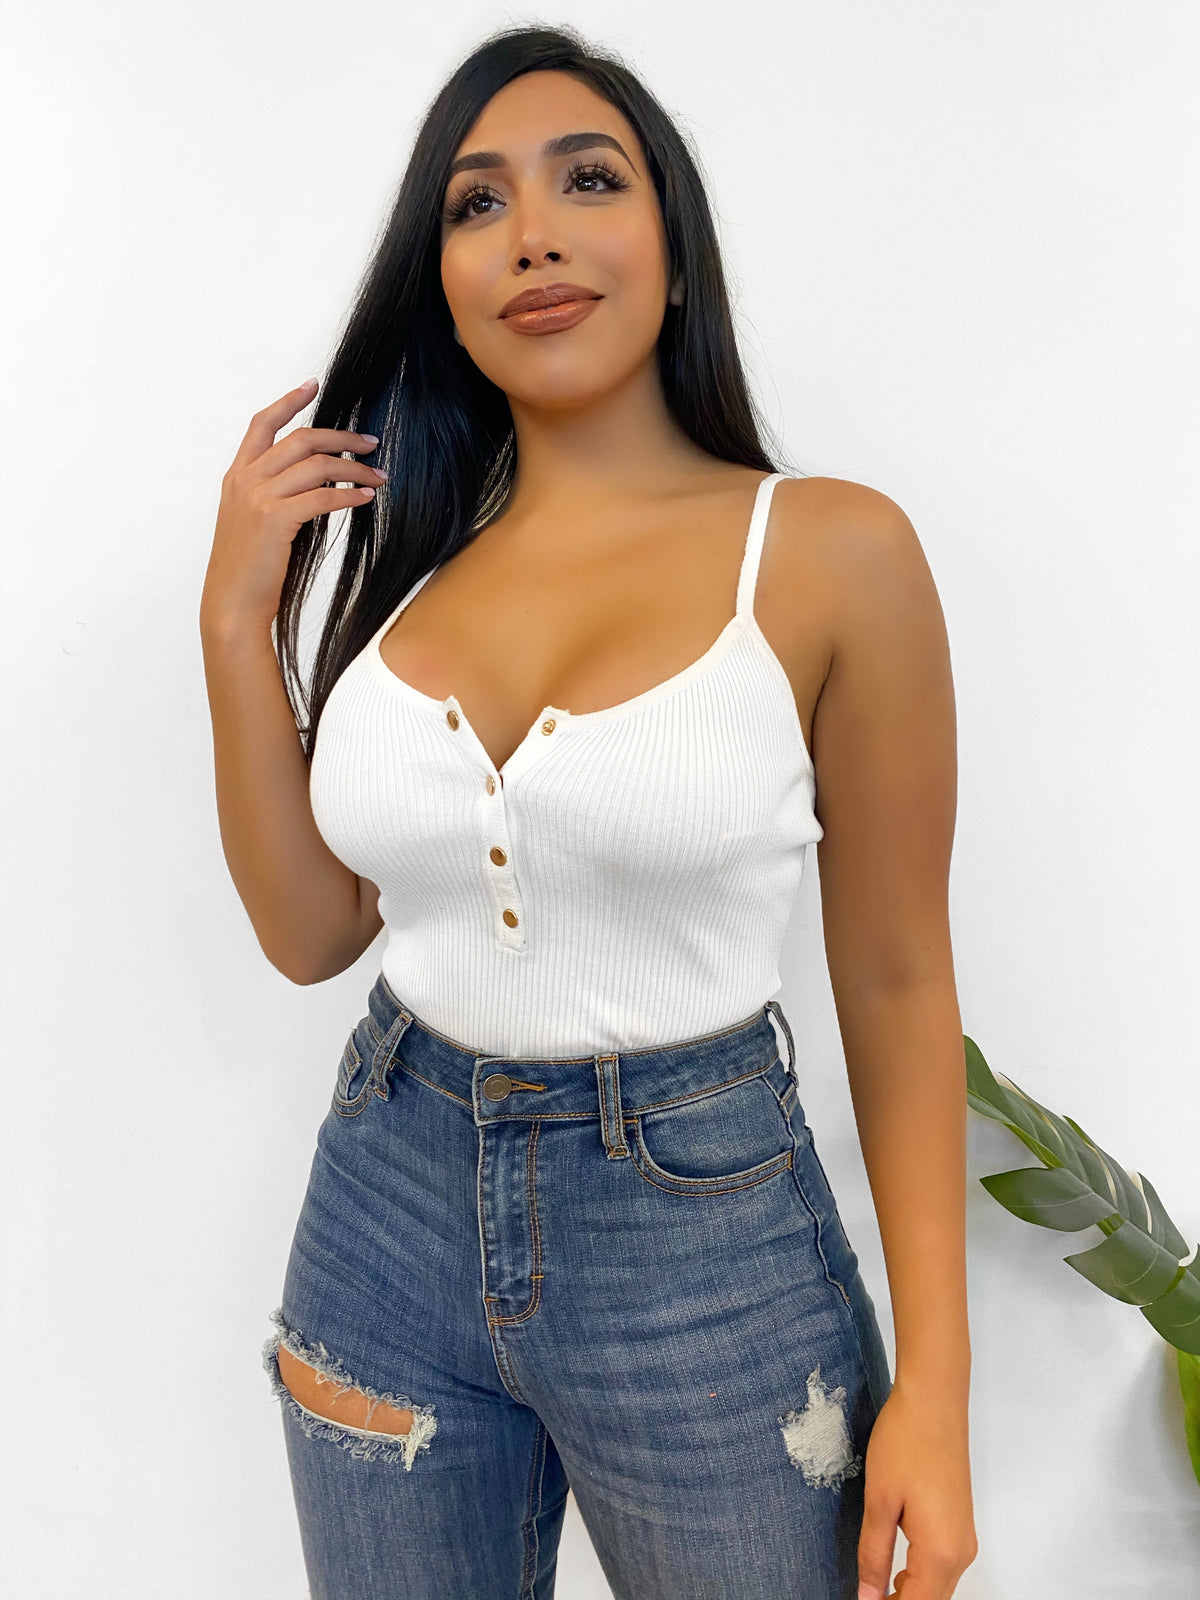 SPAGHETTI STRAP BODYSUIT, RIBBED MATERIAL, STRETCHY, MID CLEAVAGE SHOWING, MID BACK SHOWING, GOLD BUTTONS DOWN THE MIDDLE FRONT, COLOR IS WHITE.